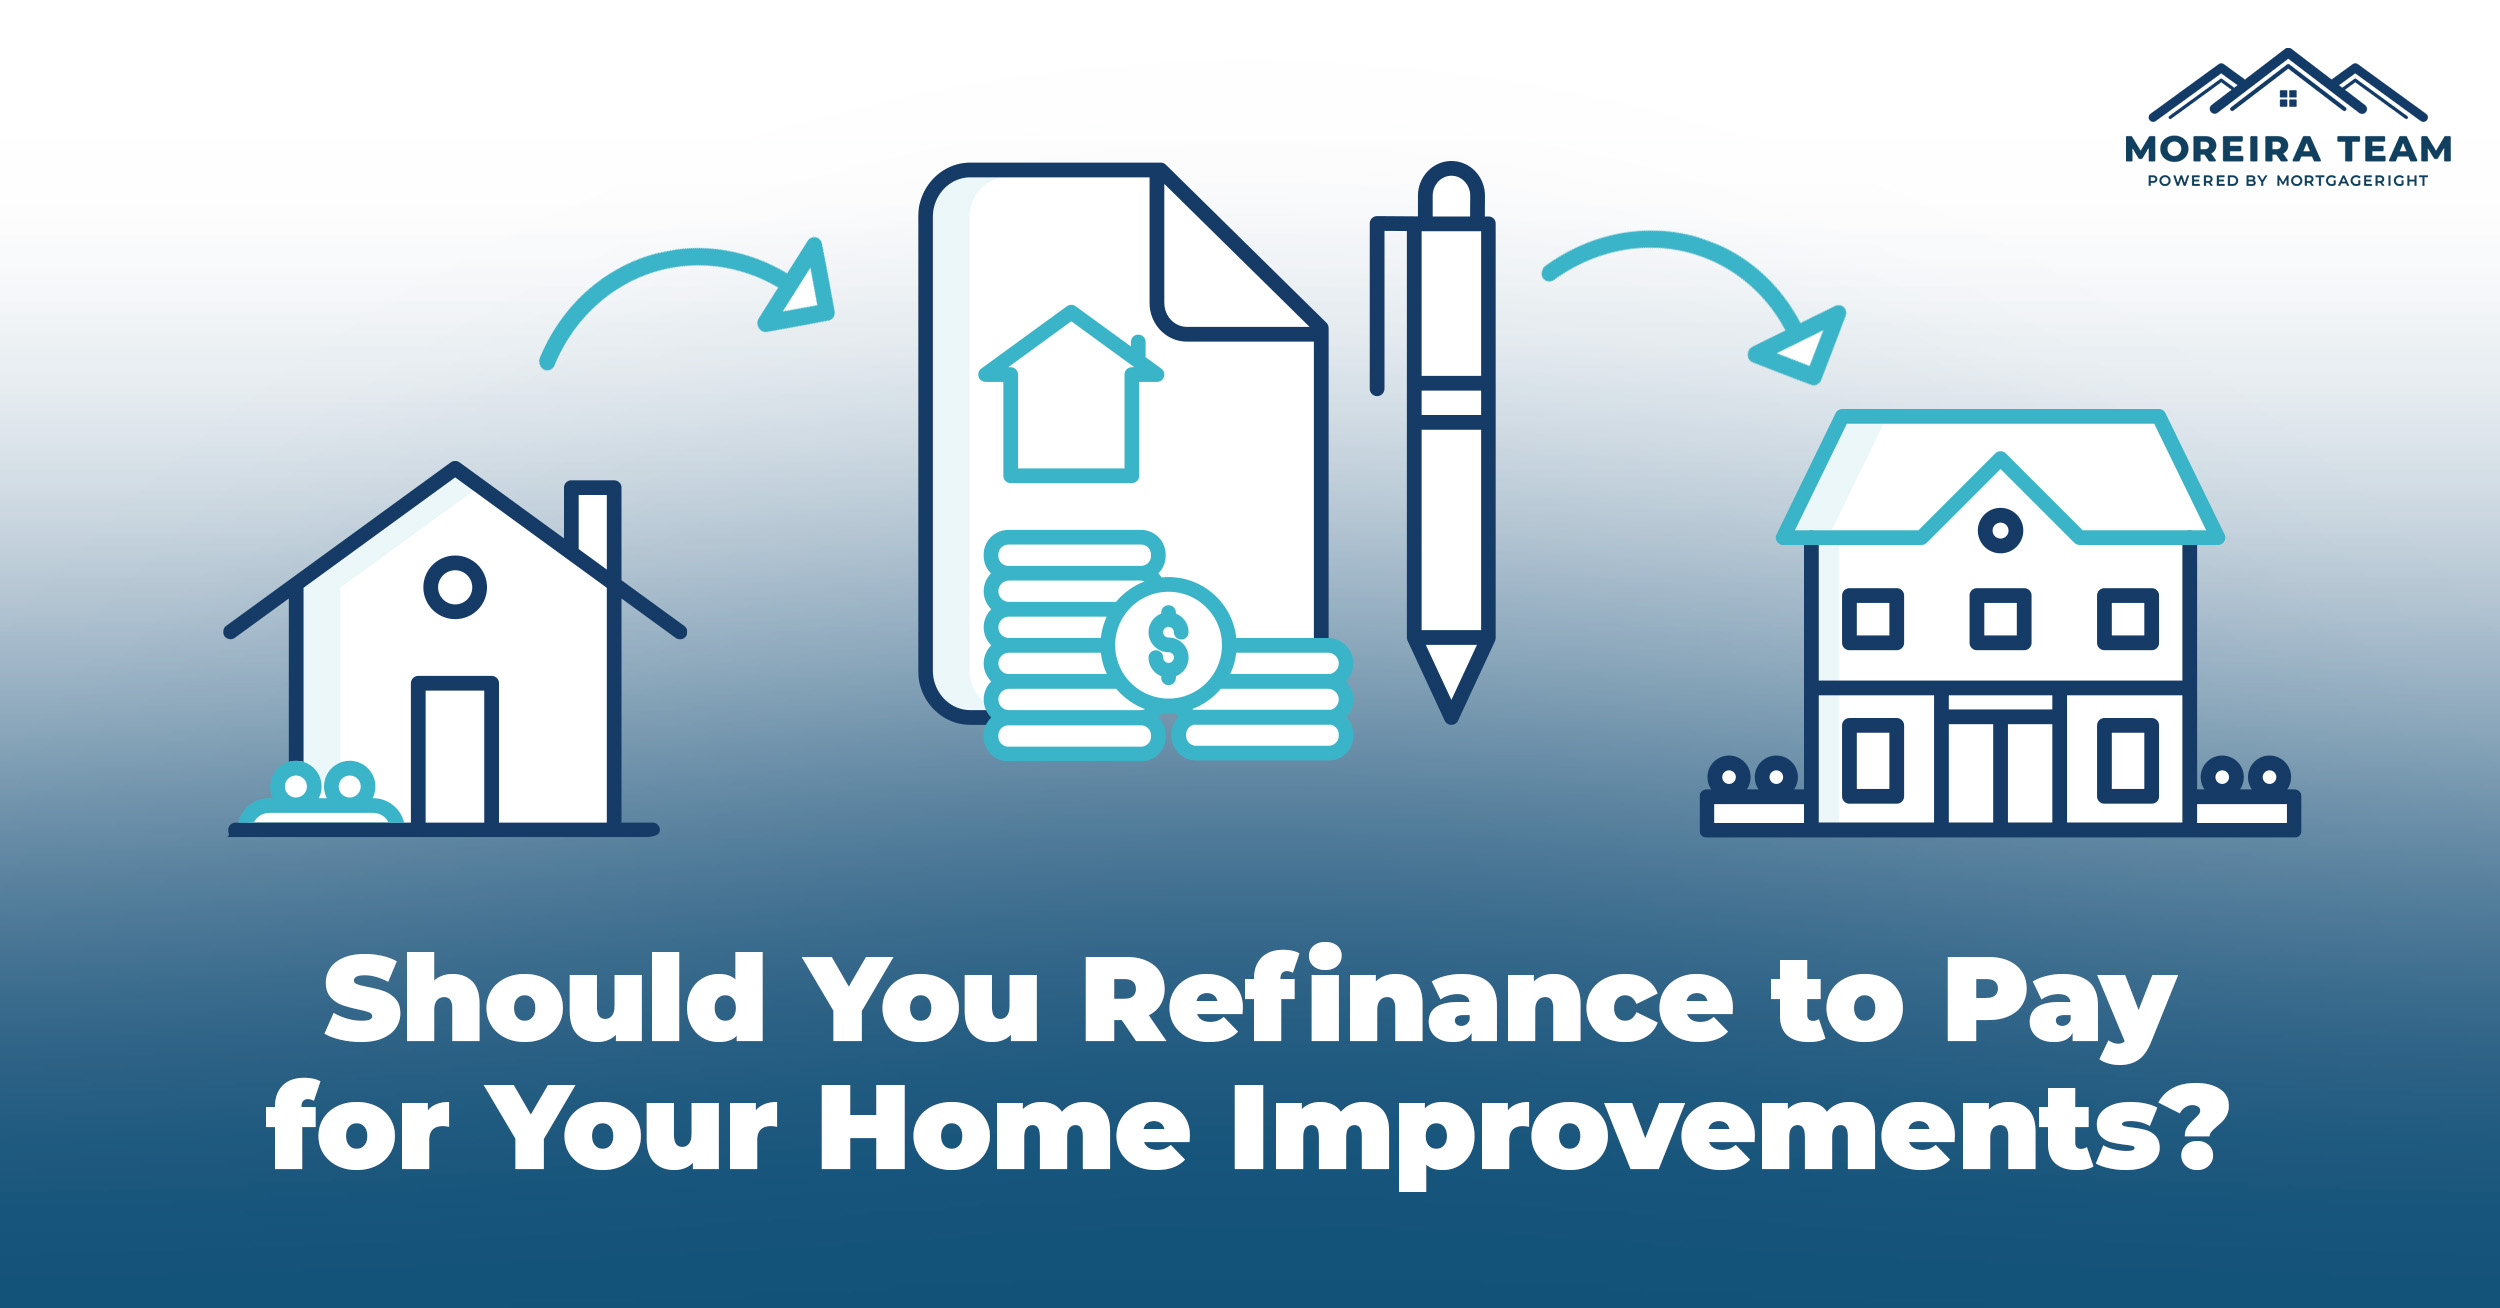 Should you refinance for home improvements